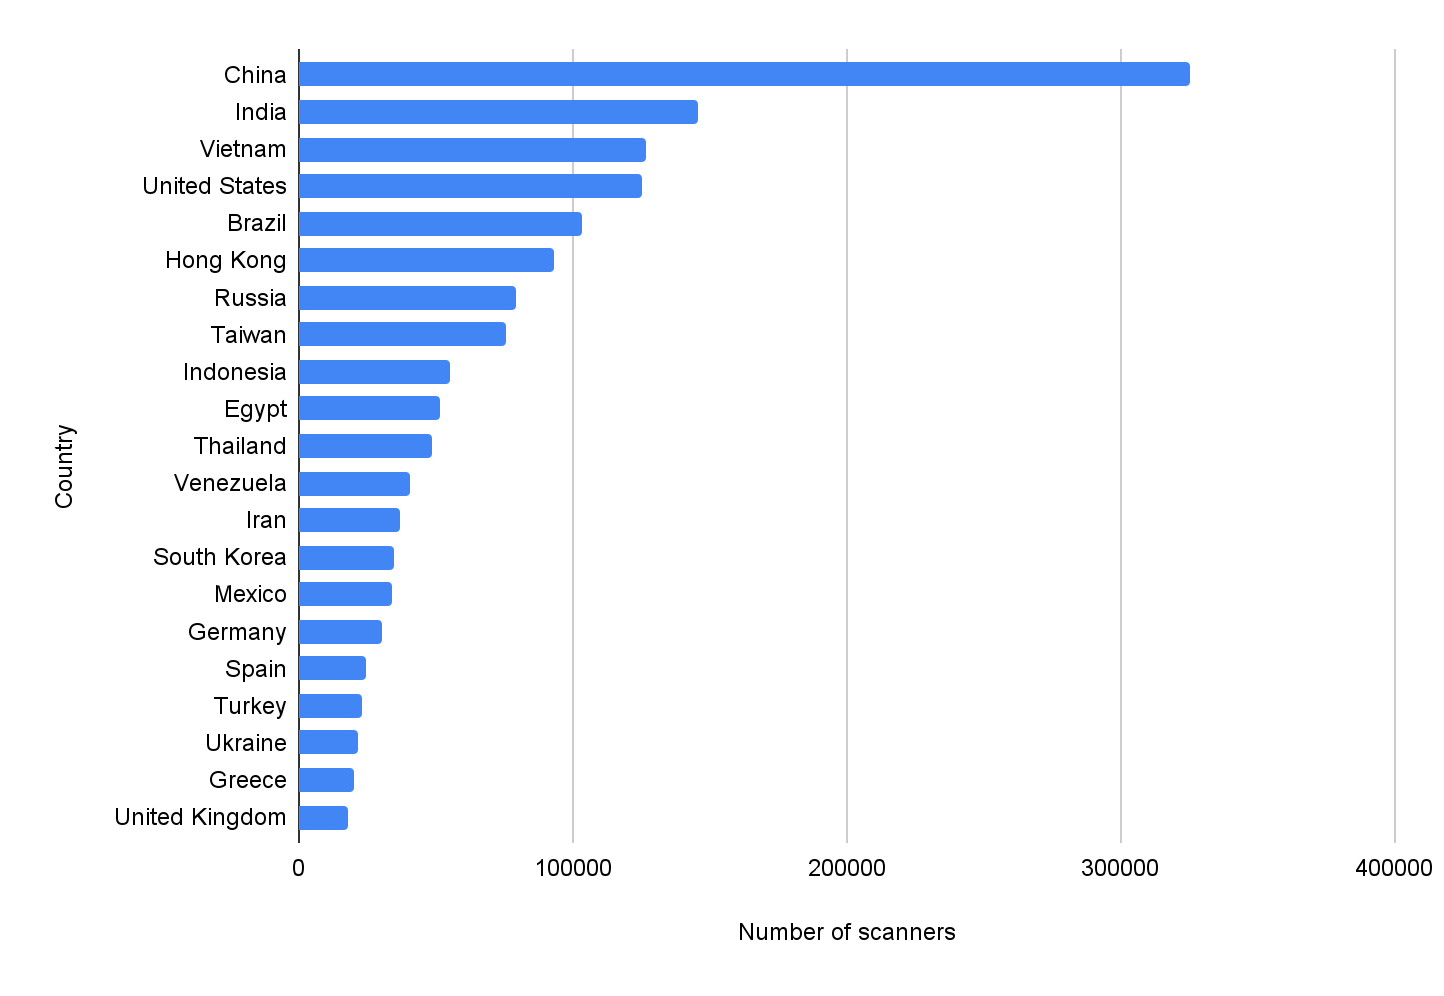 Top 20 countries where we observed the largest number of scanner IPs originating based on our study of network scanning traffic. In order from largest to smallest, the list is: China, India, Vietnam, United States, Brazil, Hong Kong, Russia, Taiwan, Indonesia, Egypt, Thailand, Venezuela, Iran, South Korea, Mexico, Germany, Spain, Turkey, Ukraine, Greece and United Kingdom. 